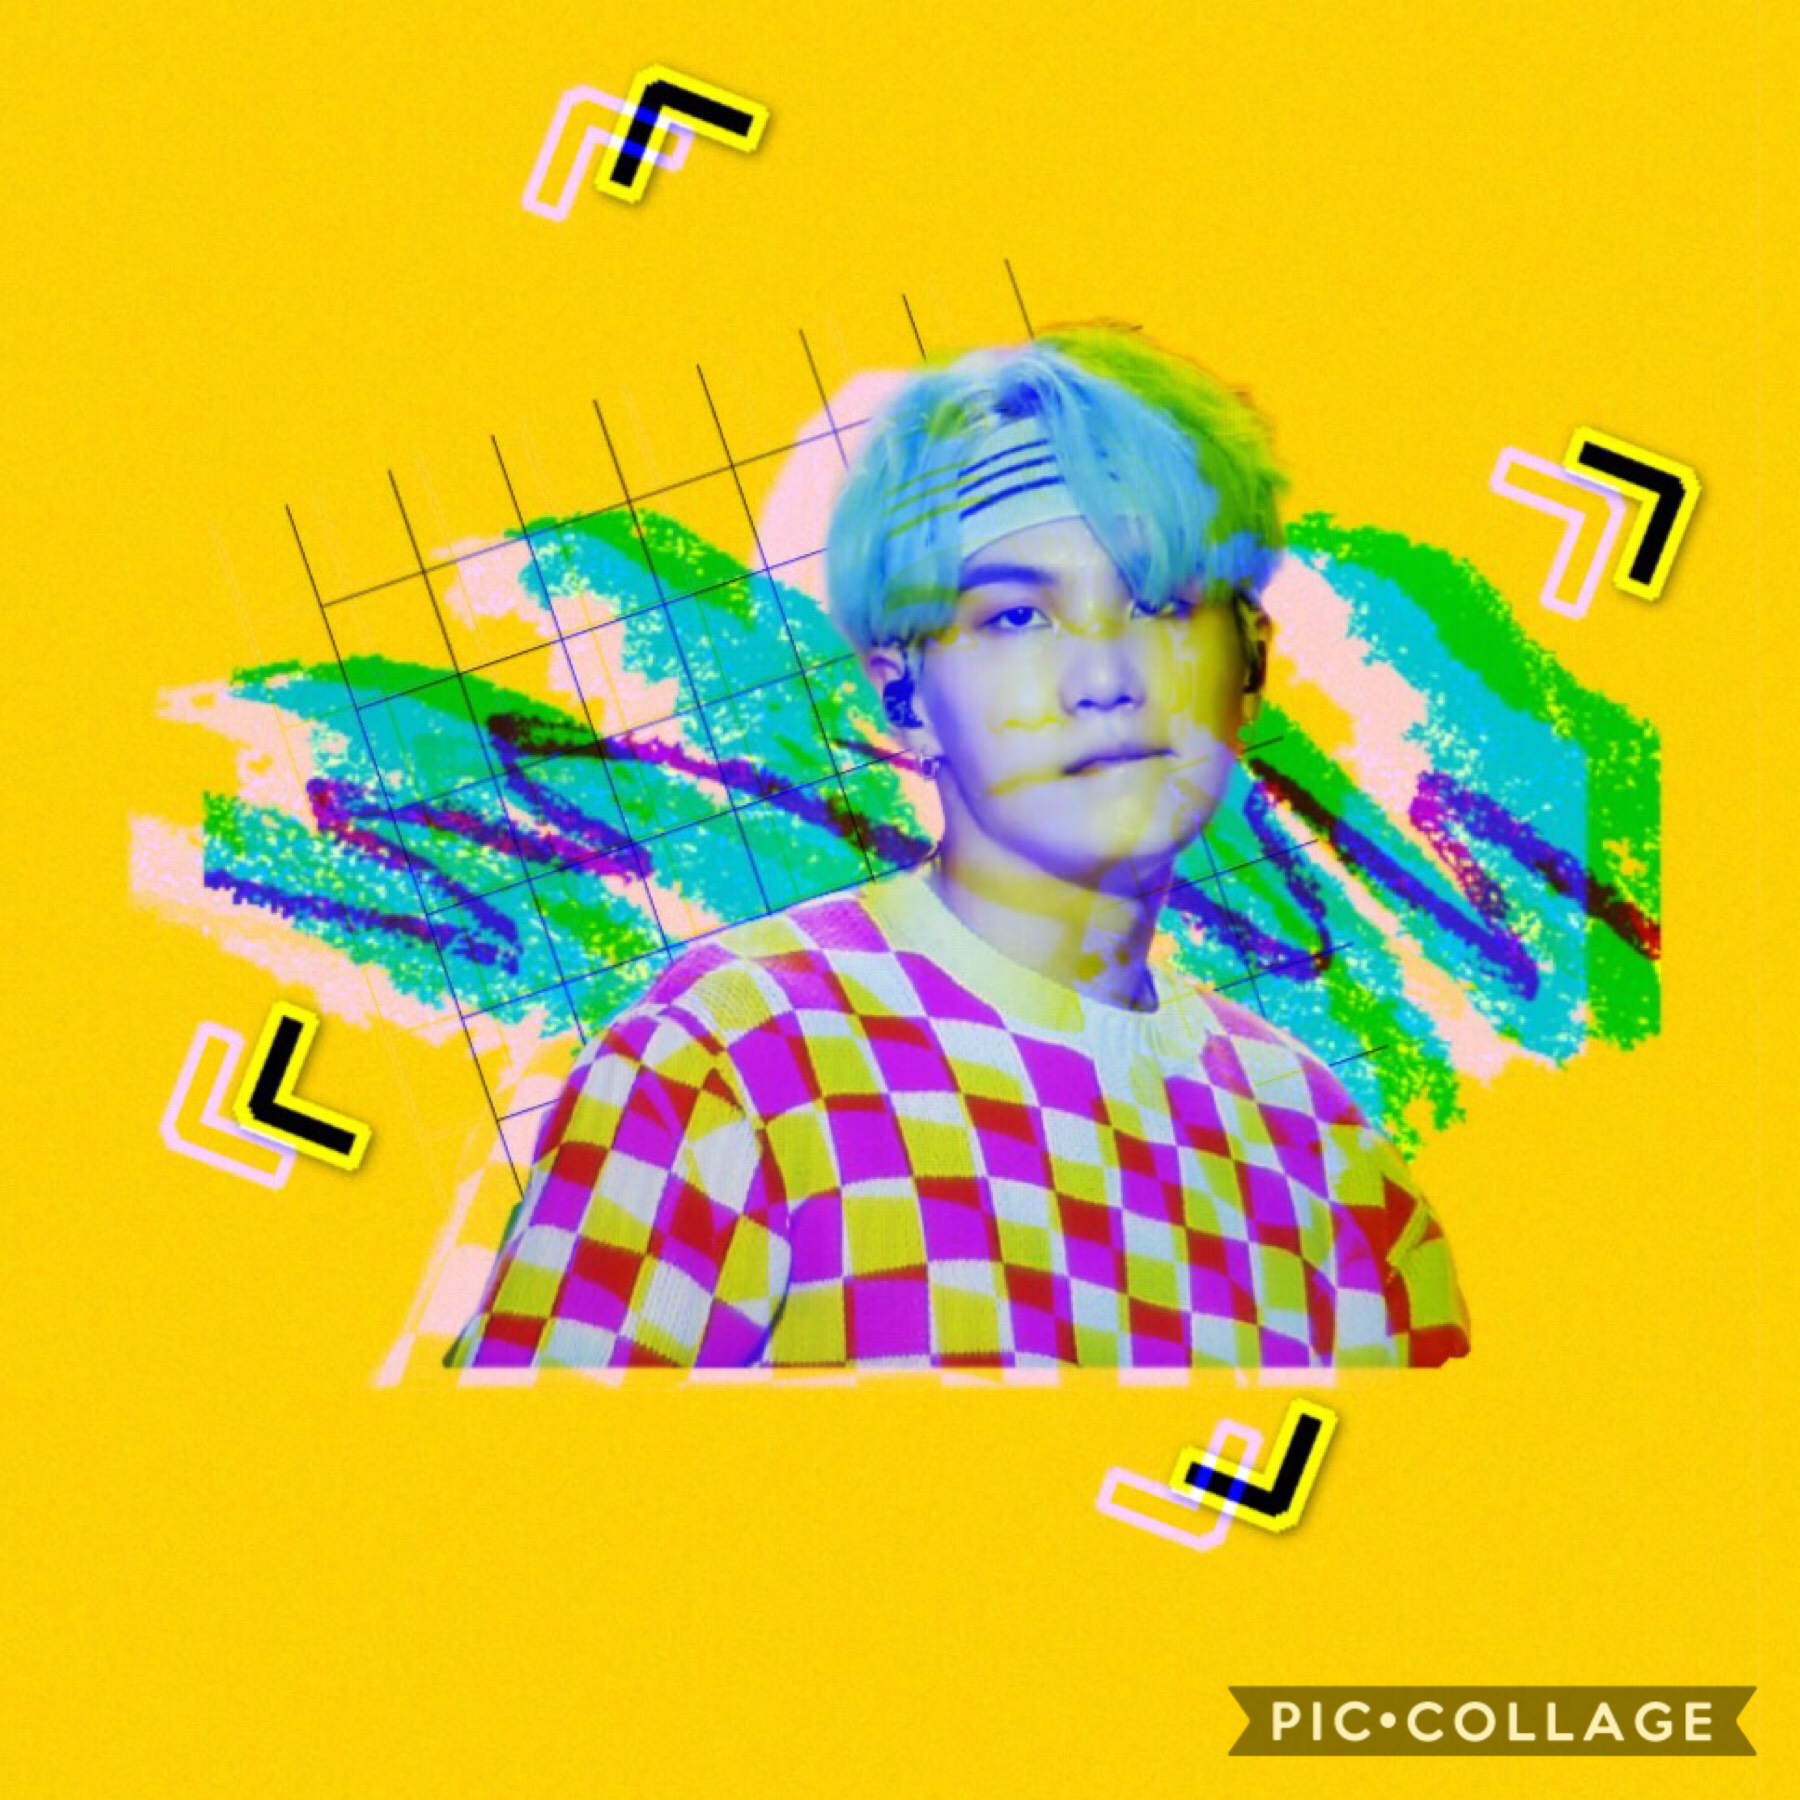 Another yoongi edit, sorry I haven’t been posting